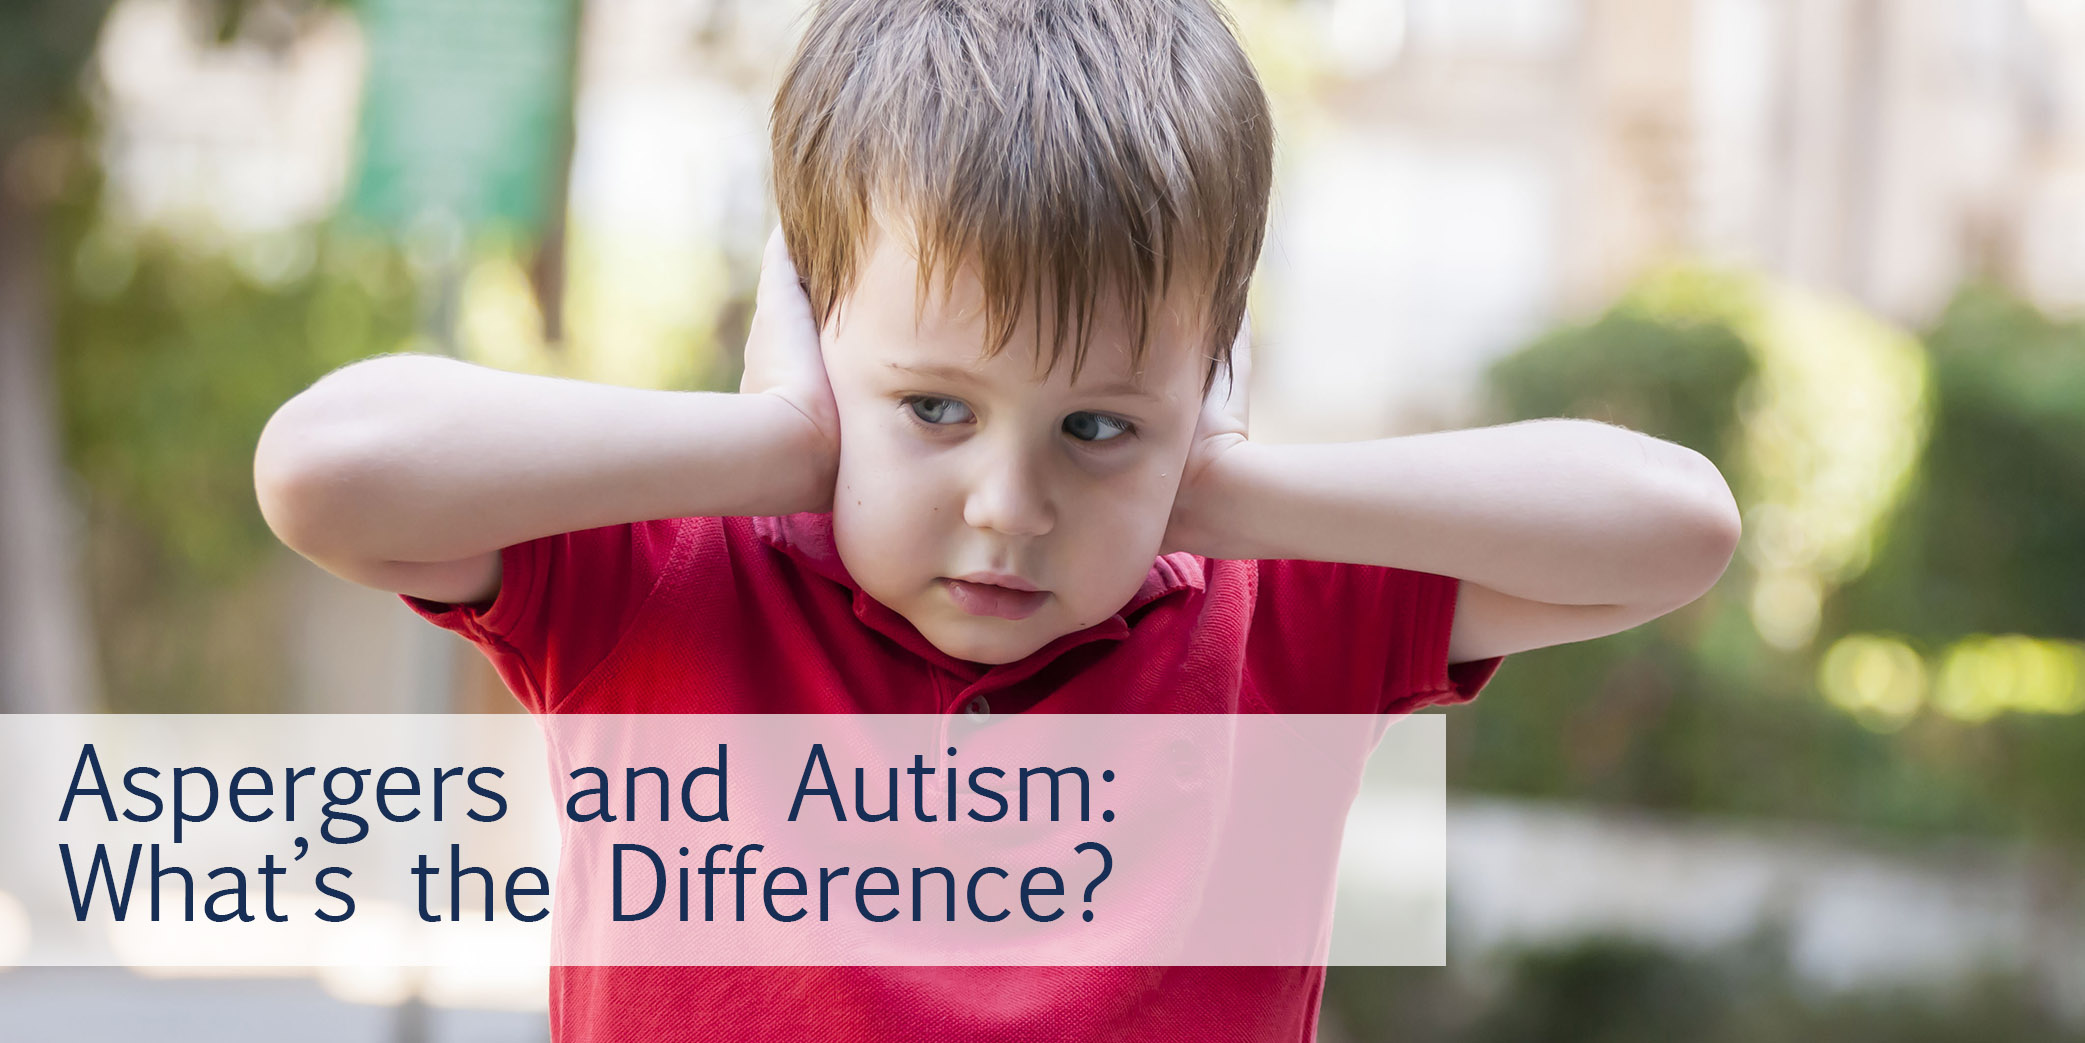 Aspergers and Autism: What’s the difference?